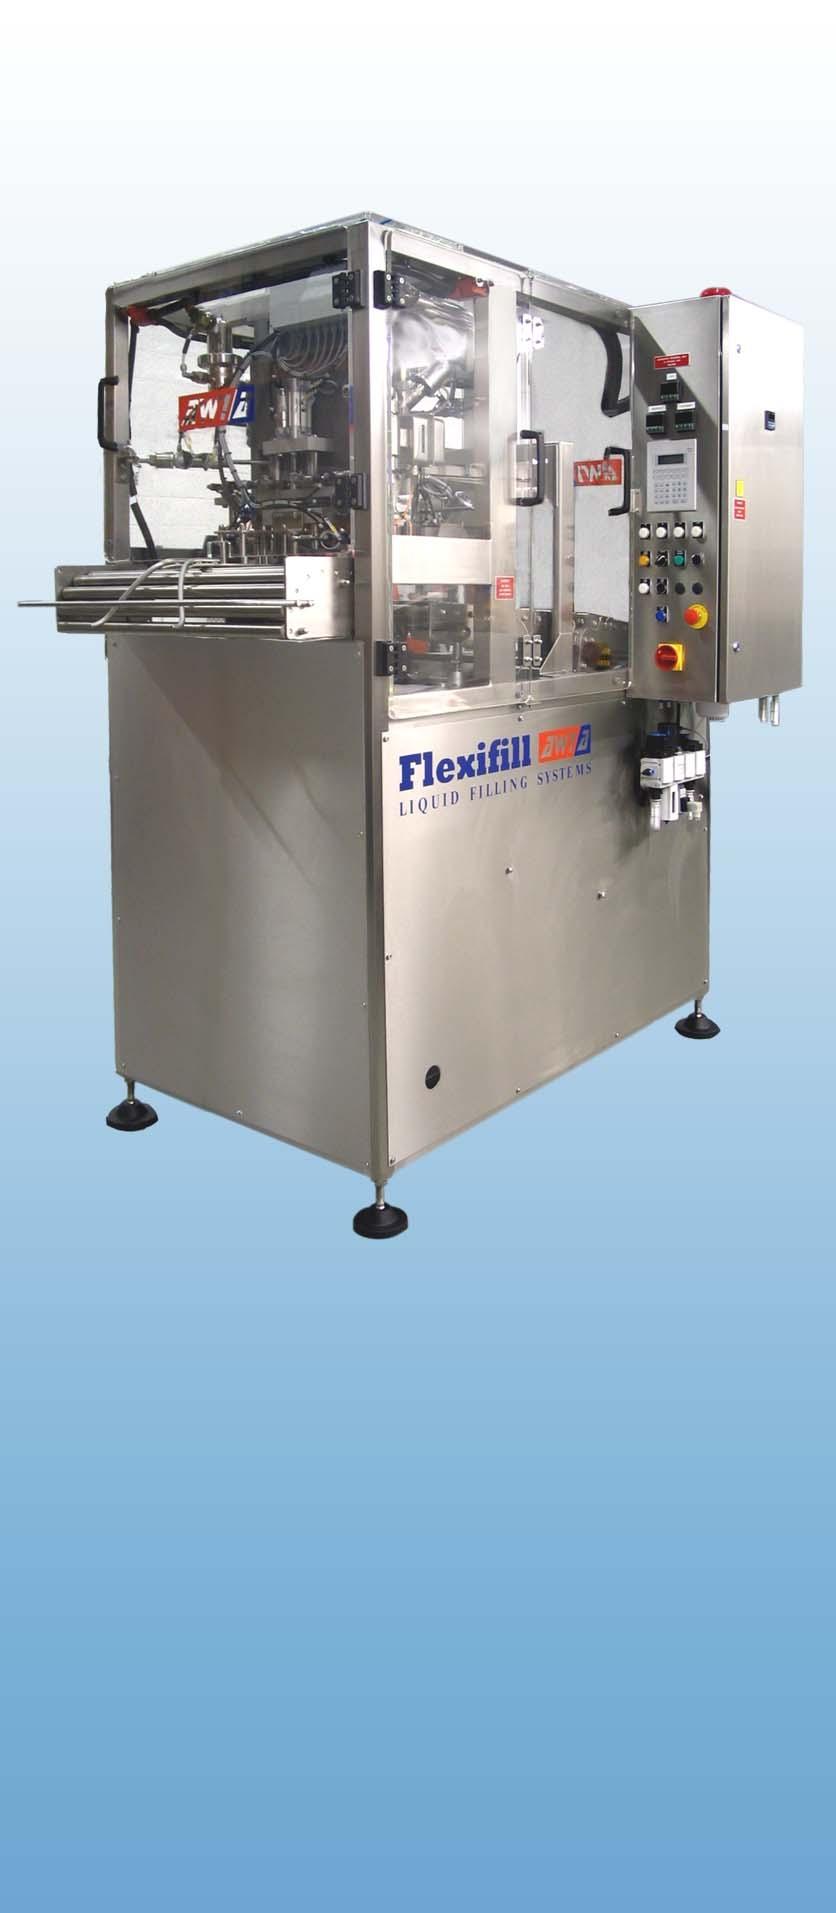 A FULLY AUTO ASEPTIC WEB FED FILLER The Flexifill AW1-A is a compact fully automatic aseptic web fed Bag-in-Box filler capable of